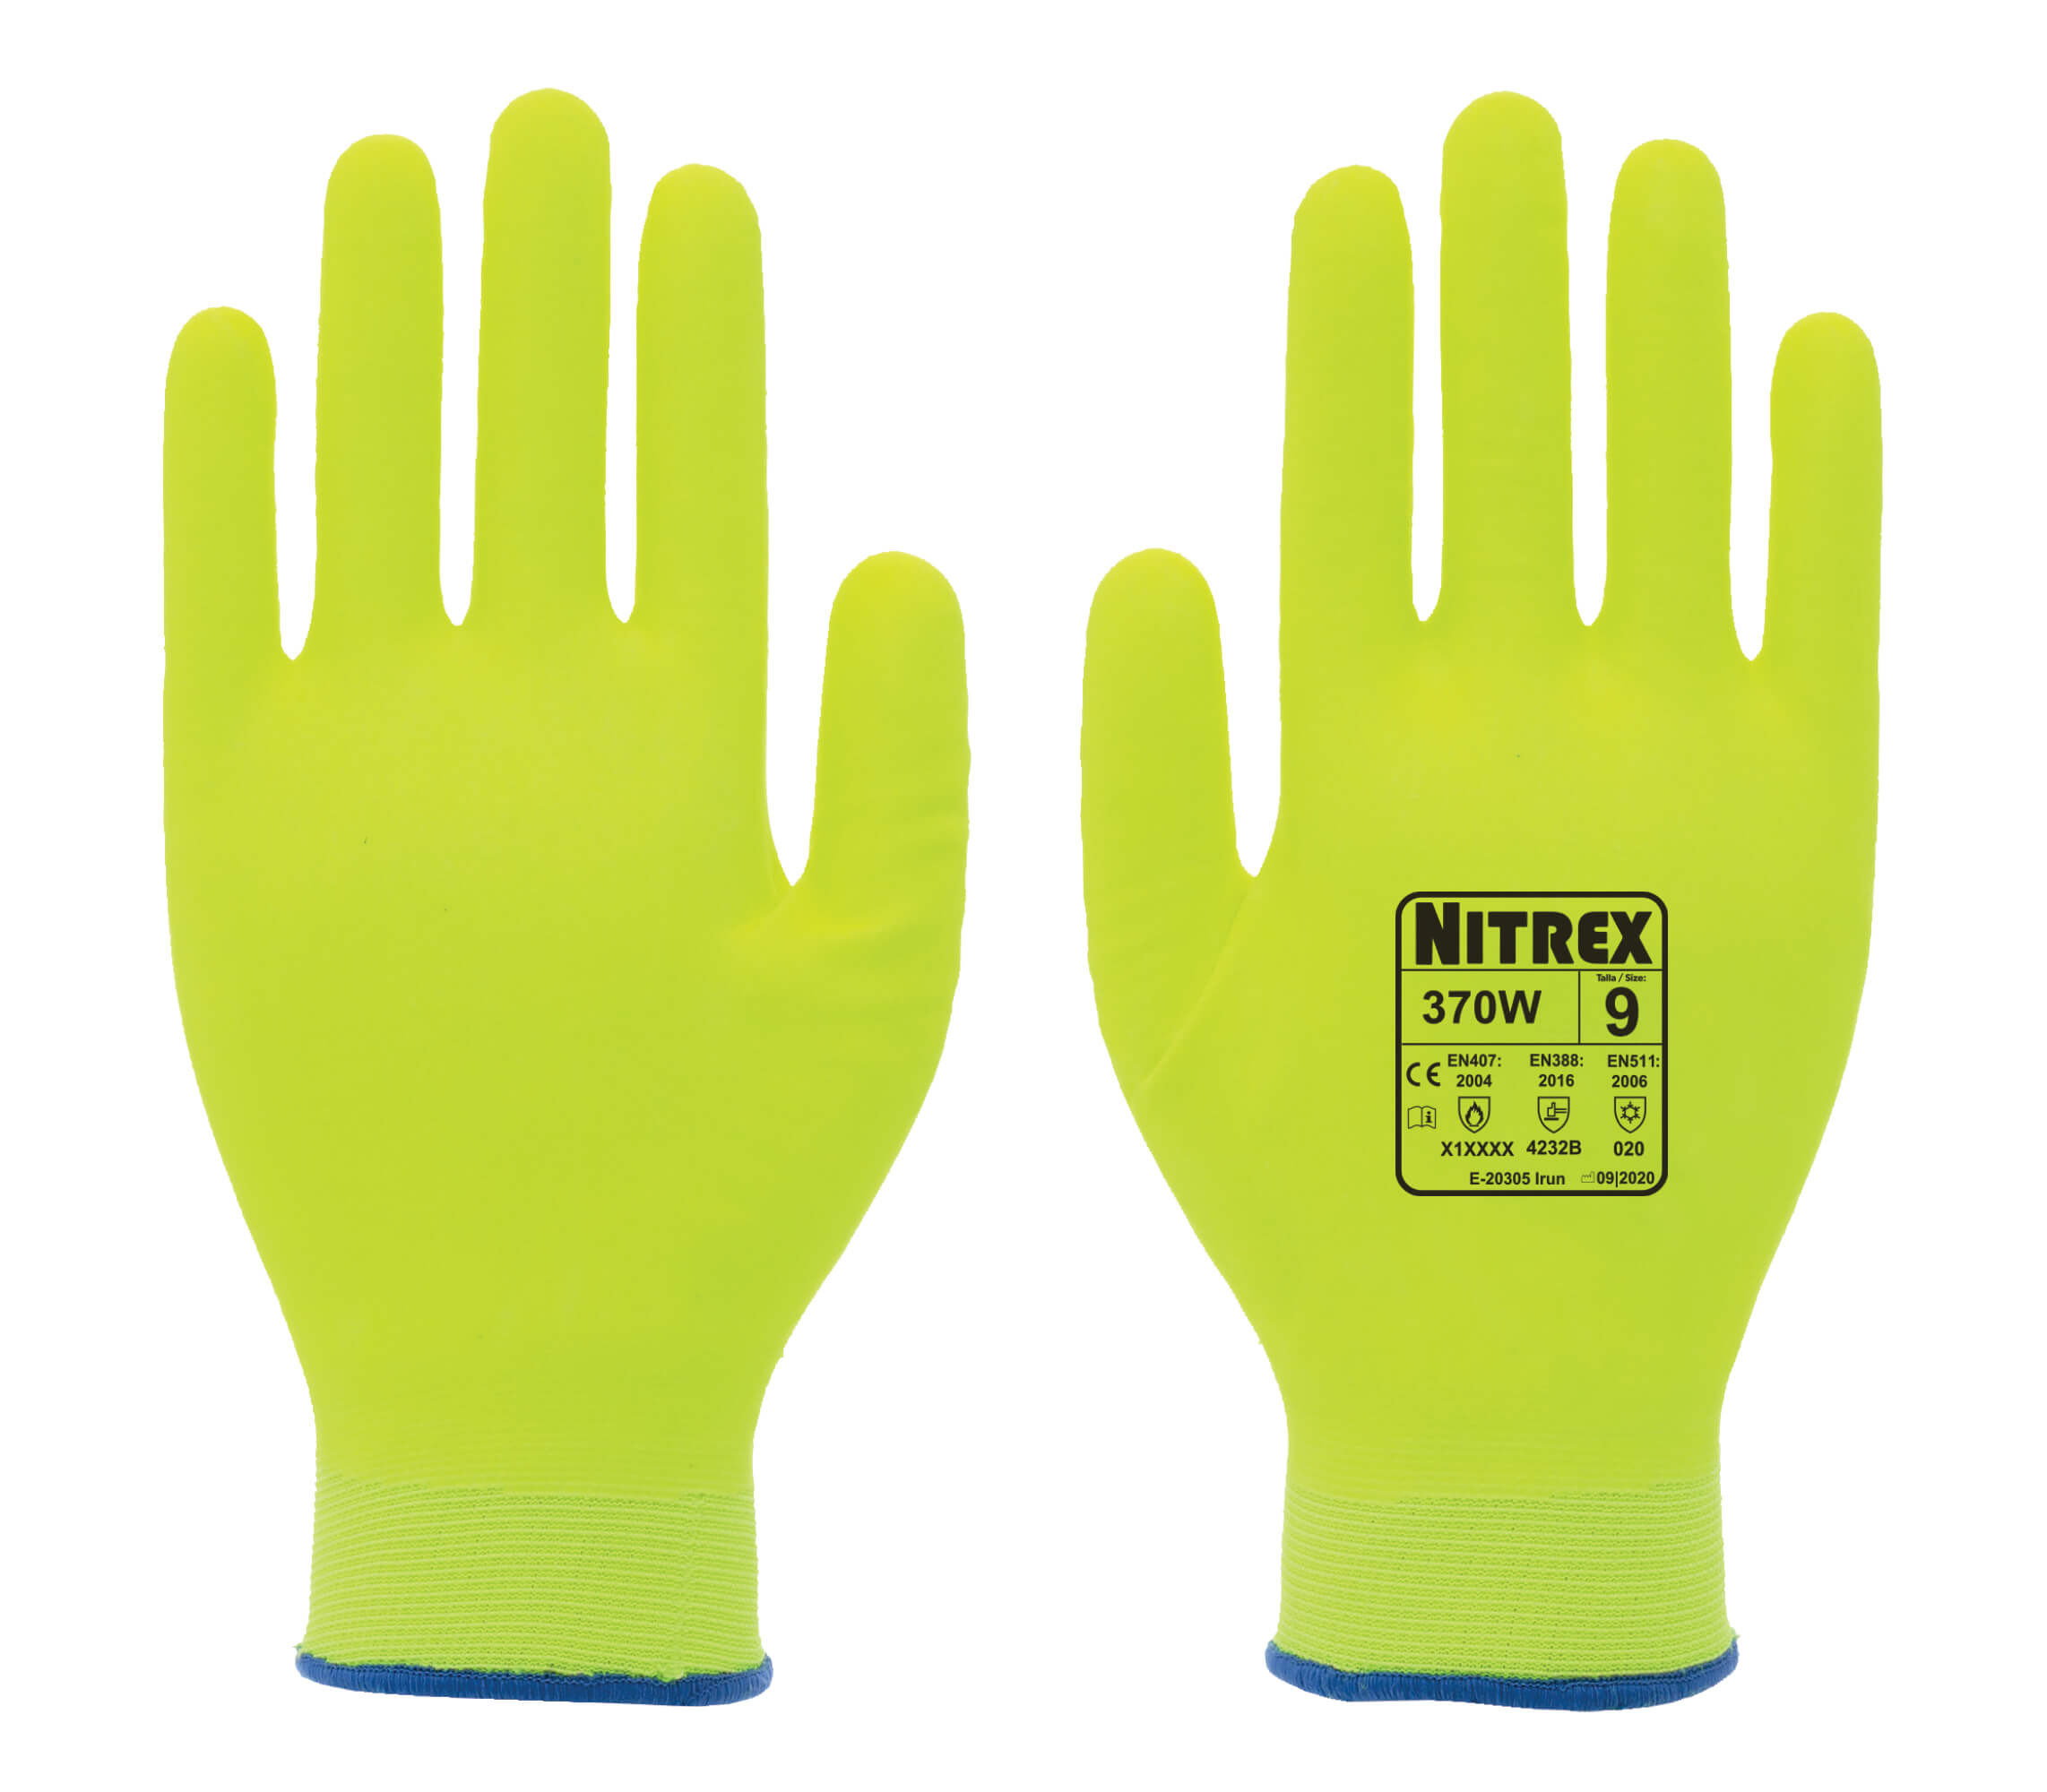 Nitrex 370W - Hi Viz Premium Thermal Work Gloves - Fully Coated Foam Nitrile - Cold & Heat Protection - Size 7/Small